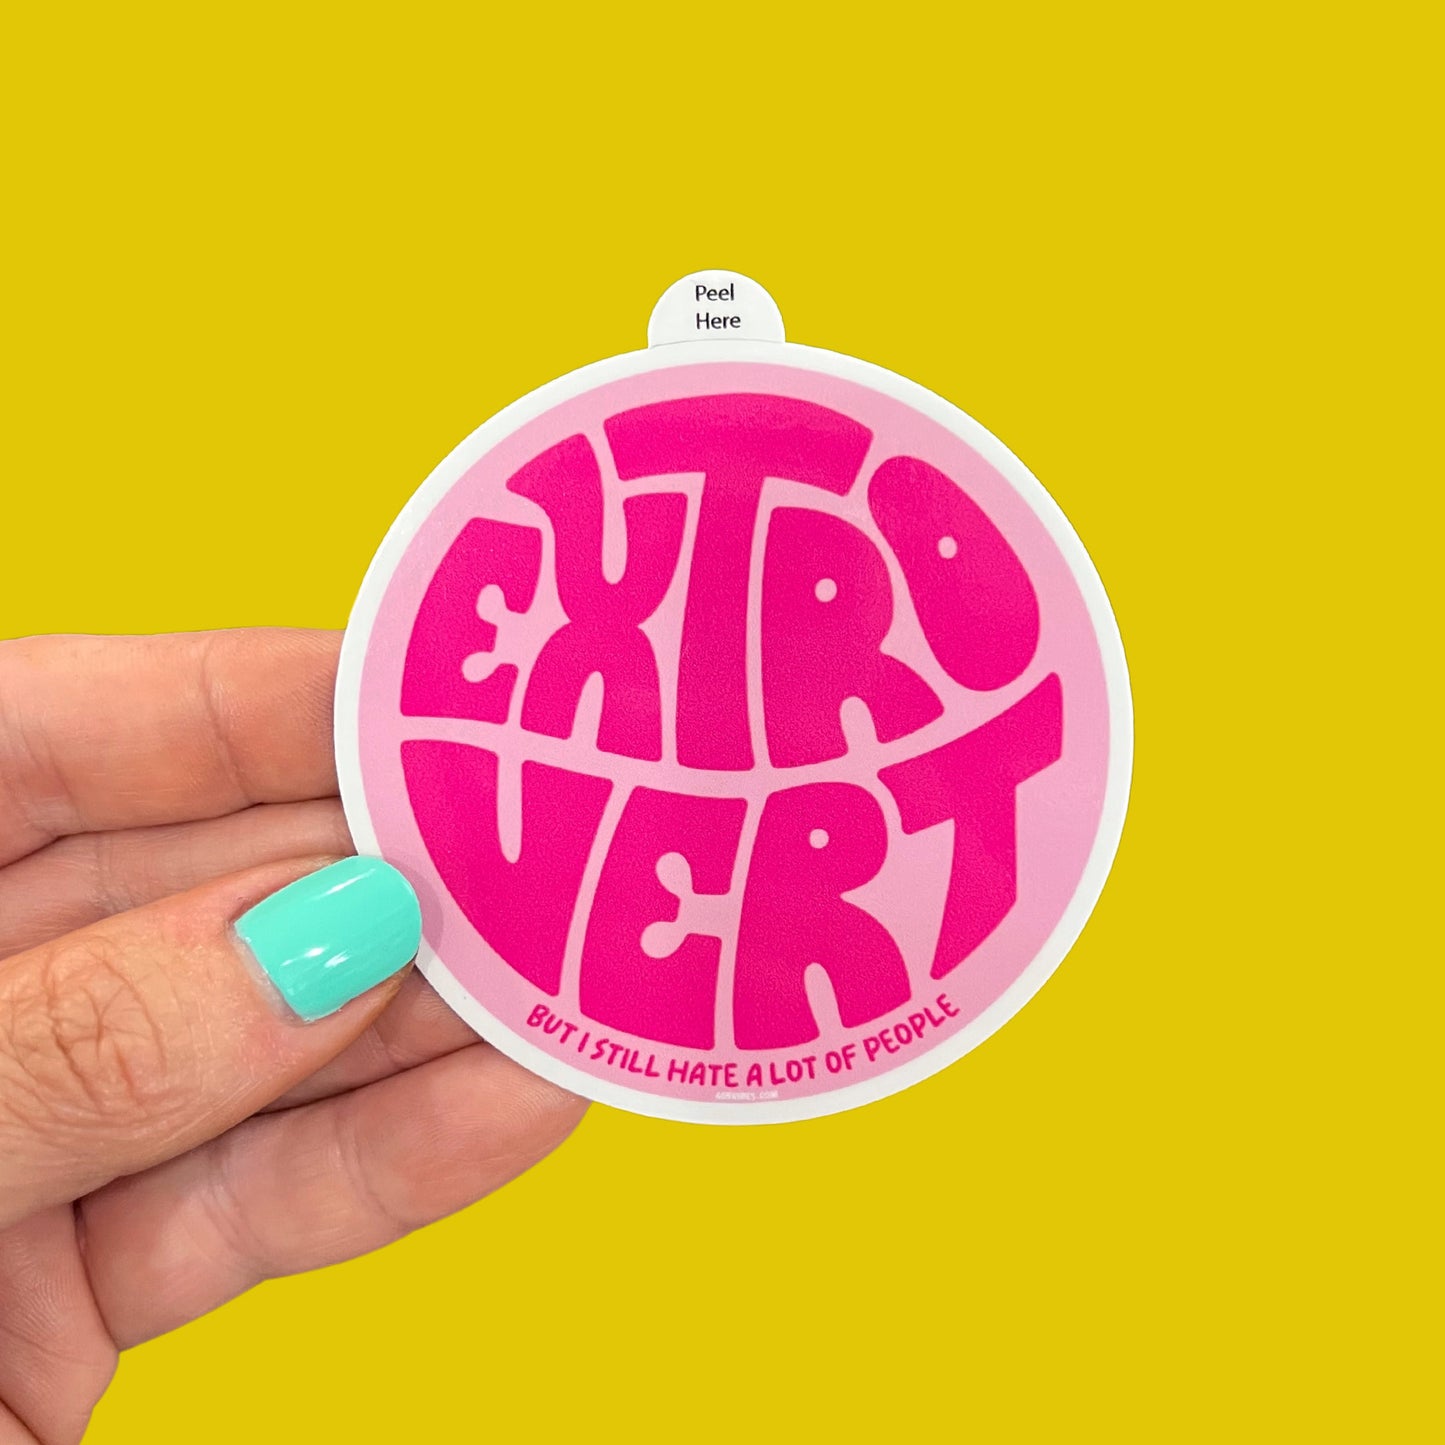 Extrovert - But I Still Hate A Lot of People Sticker